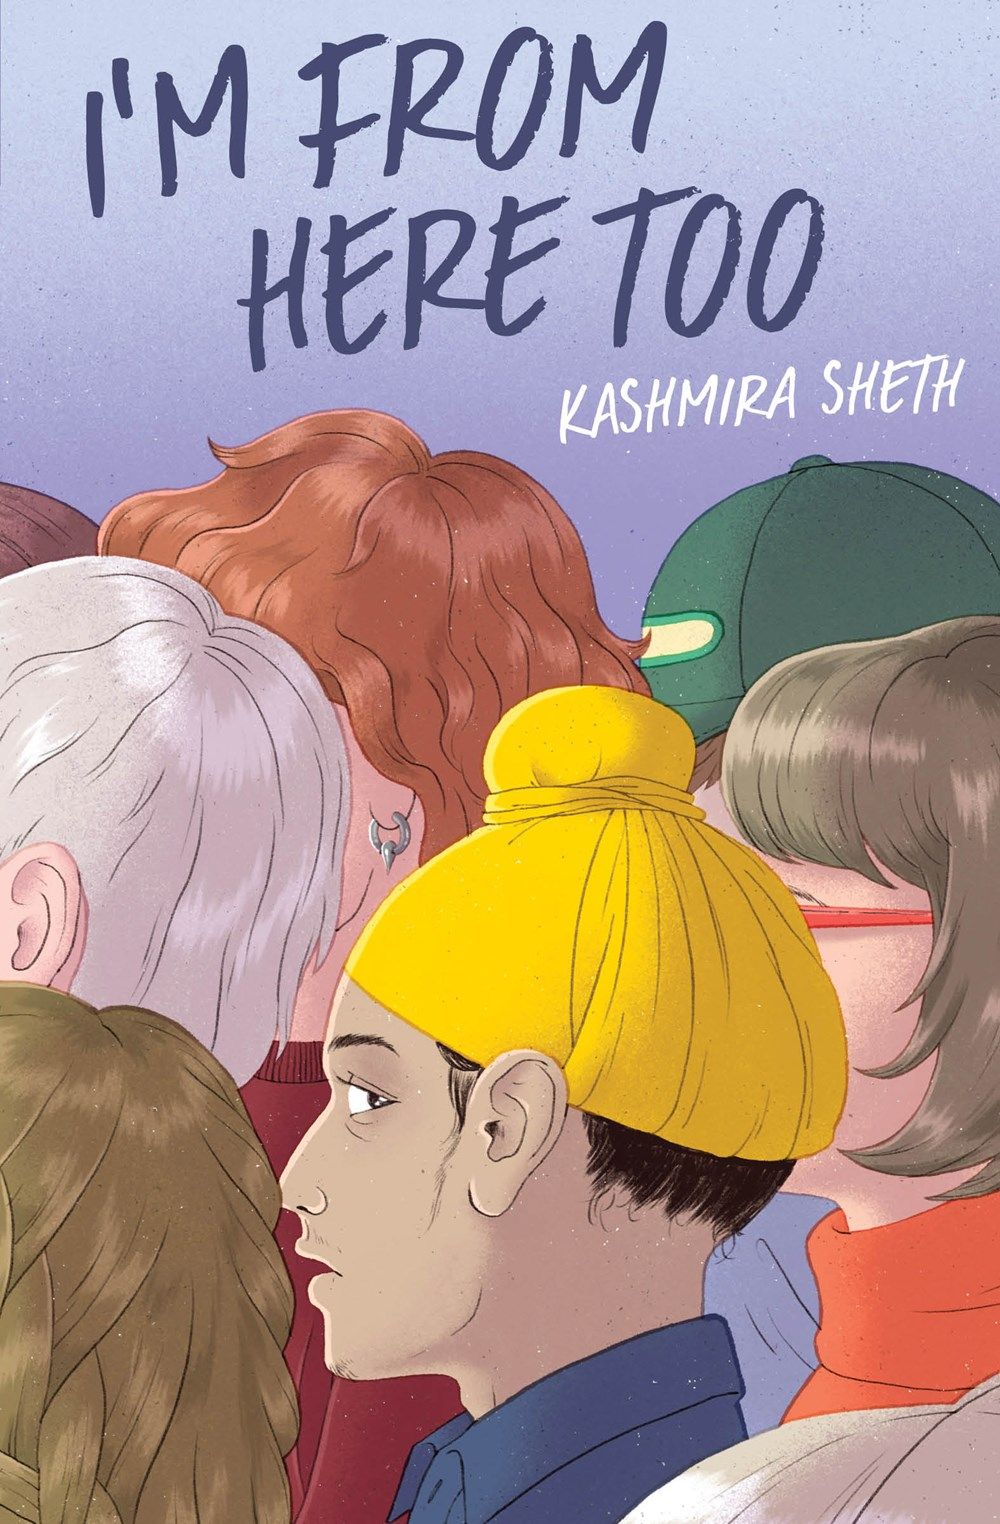 Cover of “I'm from Here Too” by Kashmira Sheth